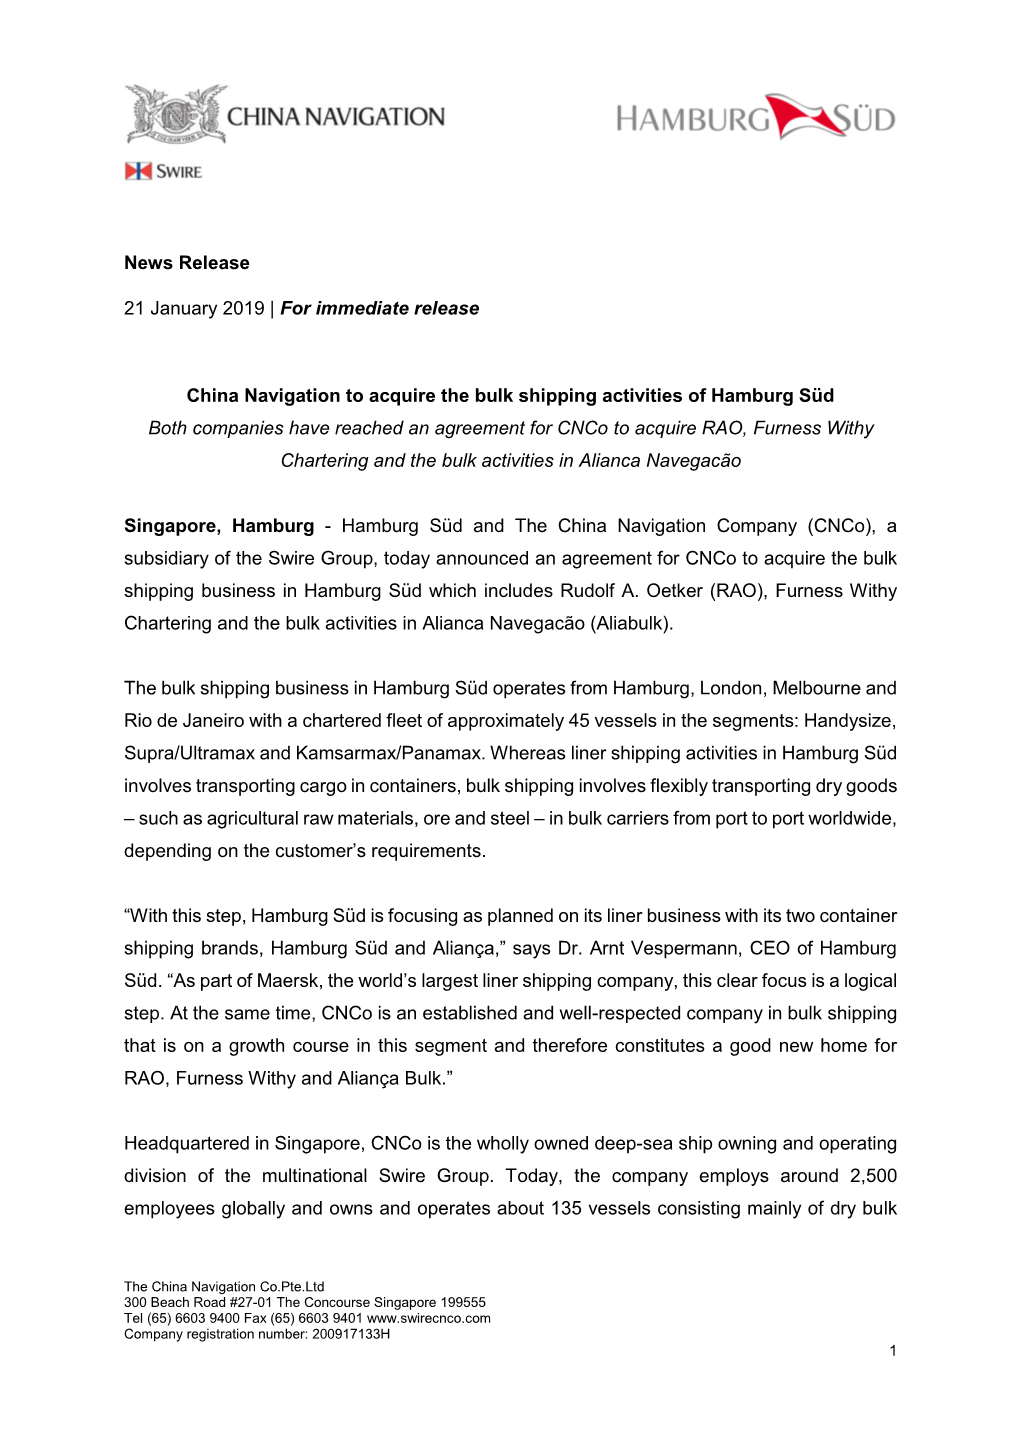 News Release 21 January 2019 | for Immediate Release China Navigation to Acquire the Bulk Shipping Activities of Hamburg Süd B